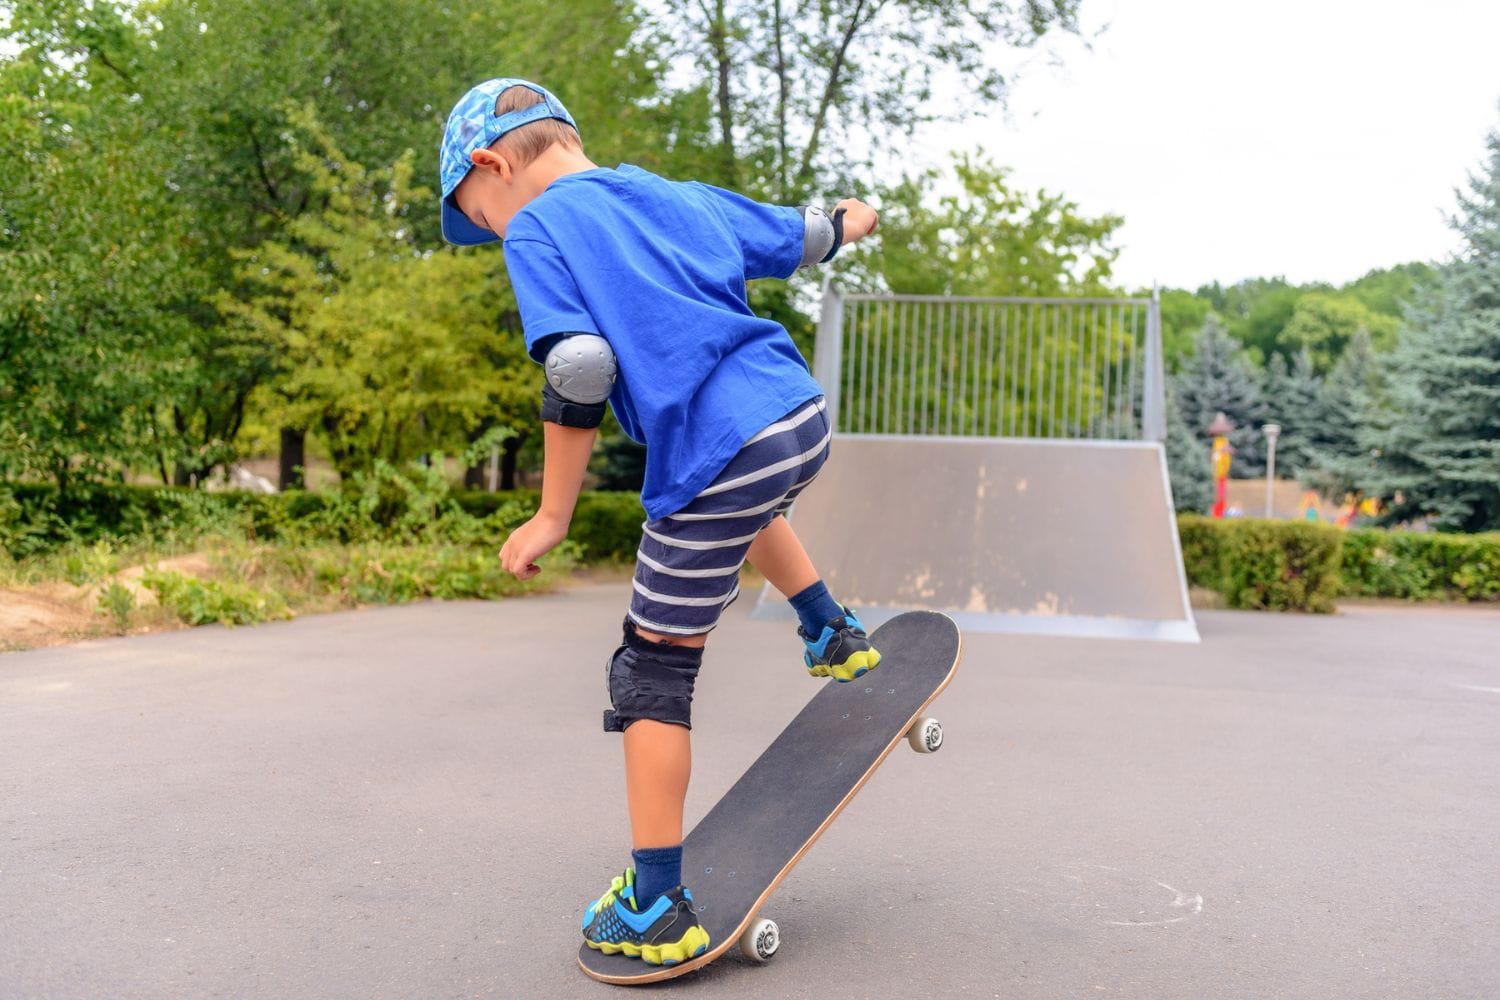 A Guide to Getting Your Kids into Skateboarding